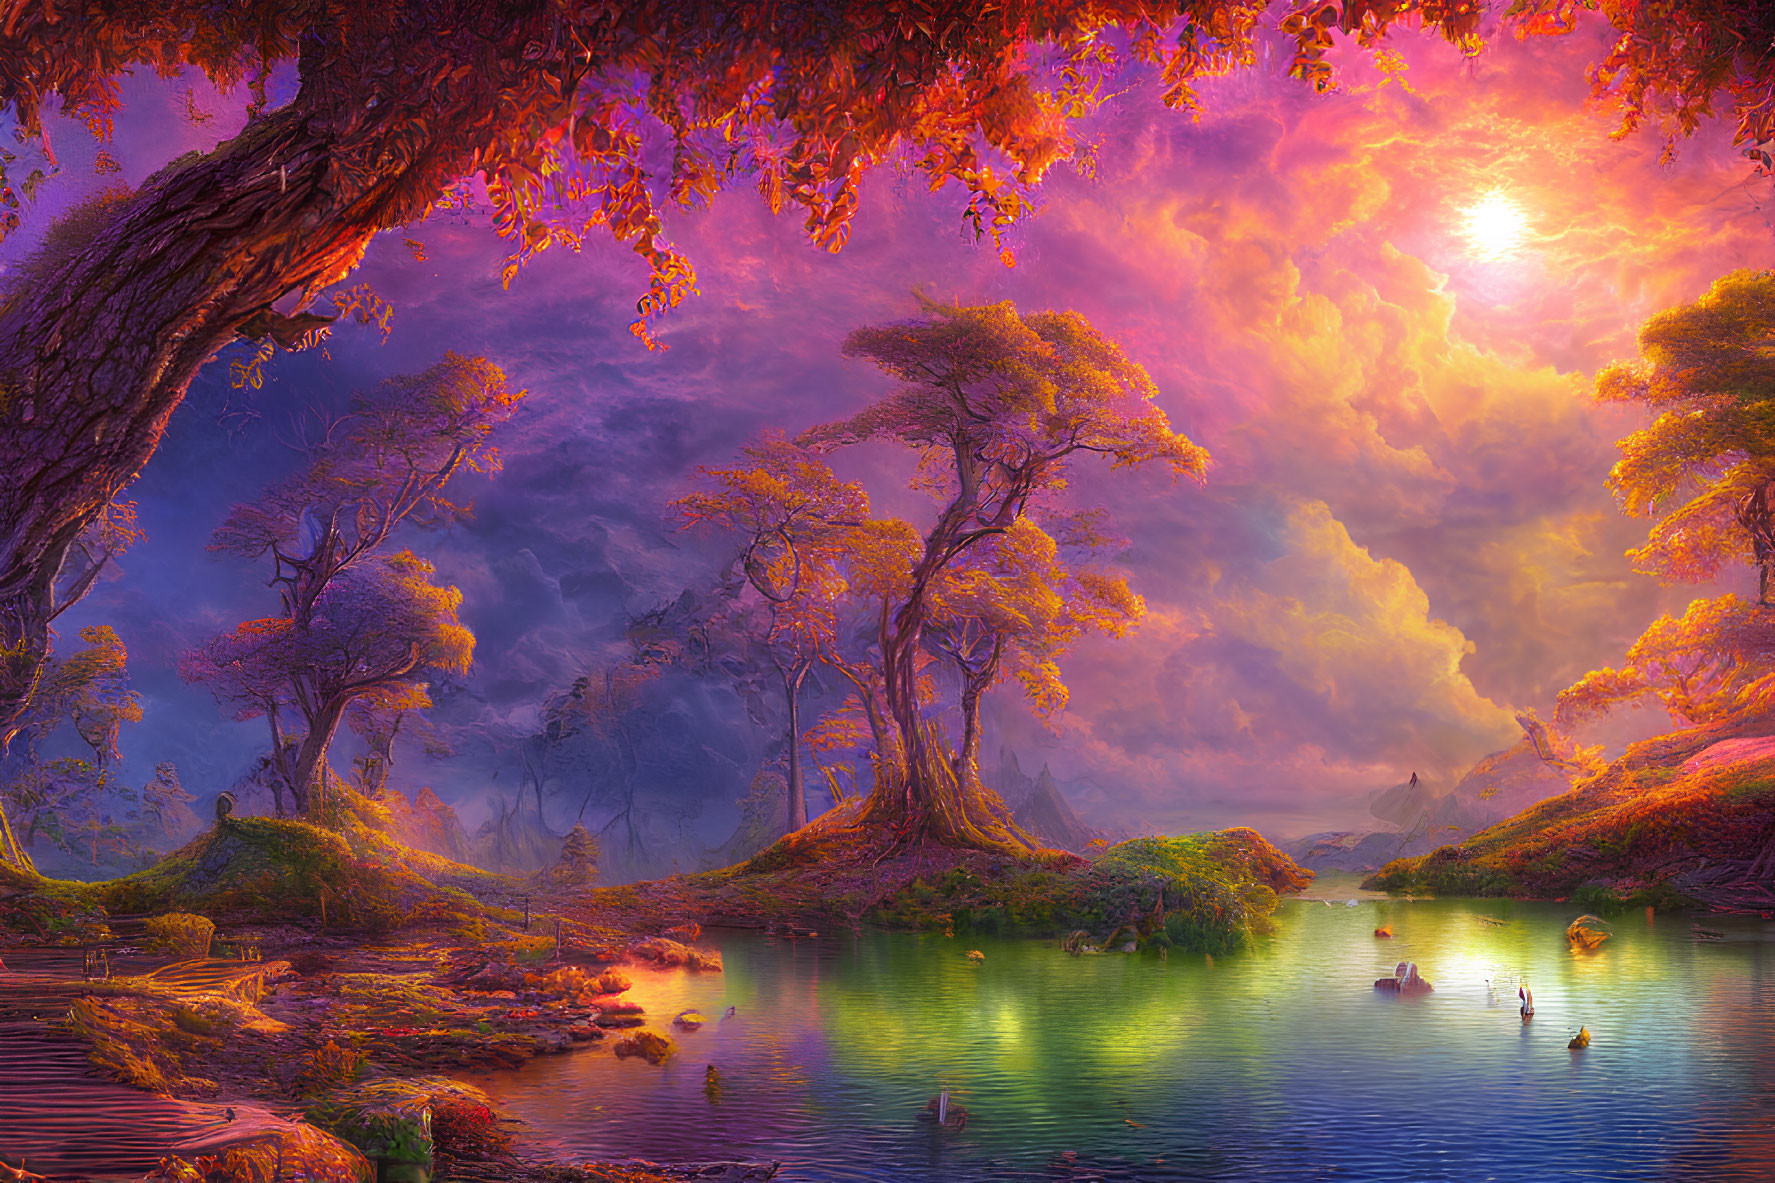 Colorful Fantasy Landscape with Twisted Trees and Serene Pond